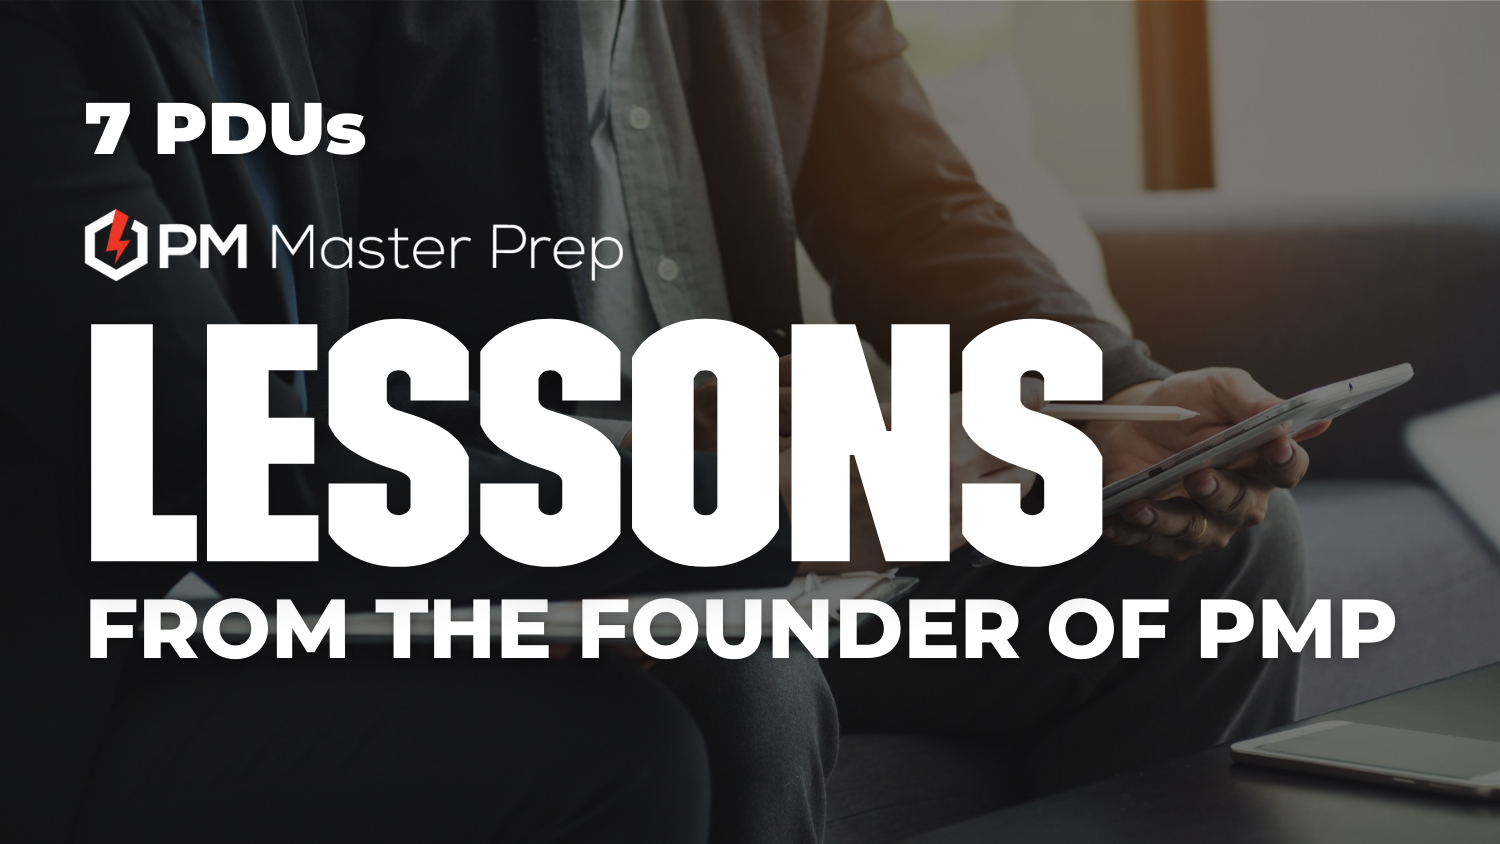 Lessons From the Founder of the PMP PDU course by PM Master Prep.